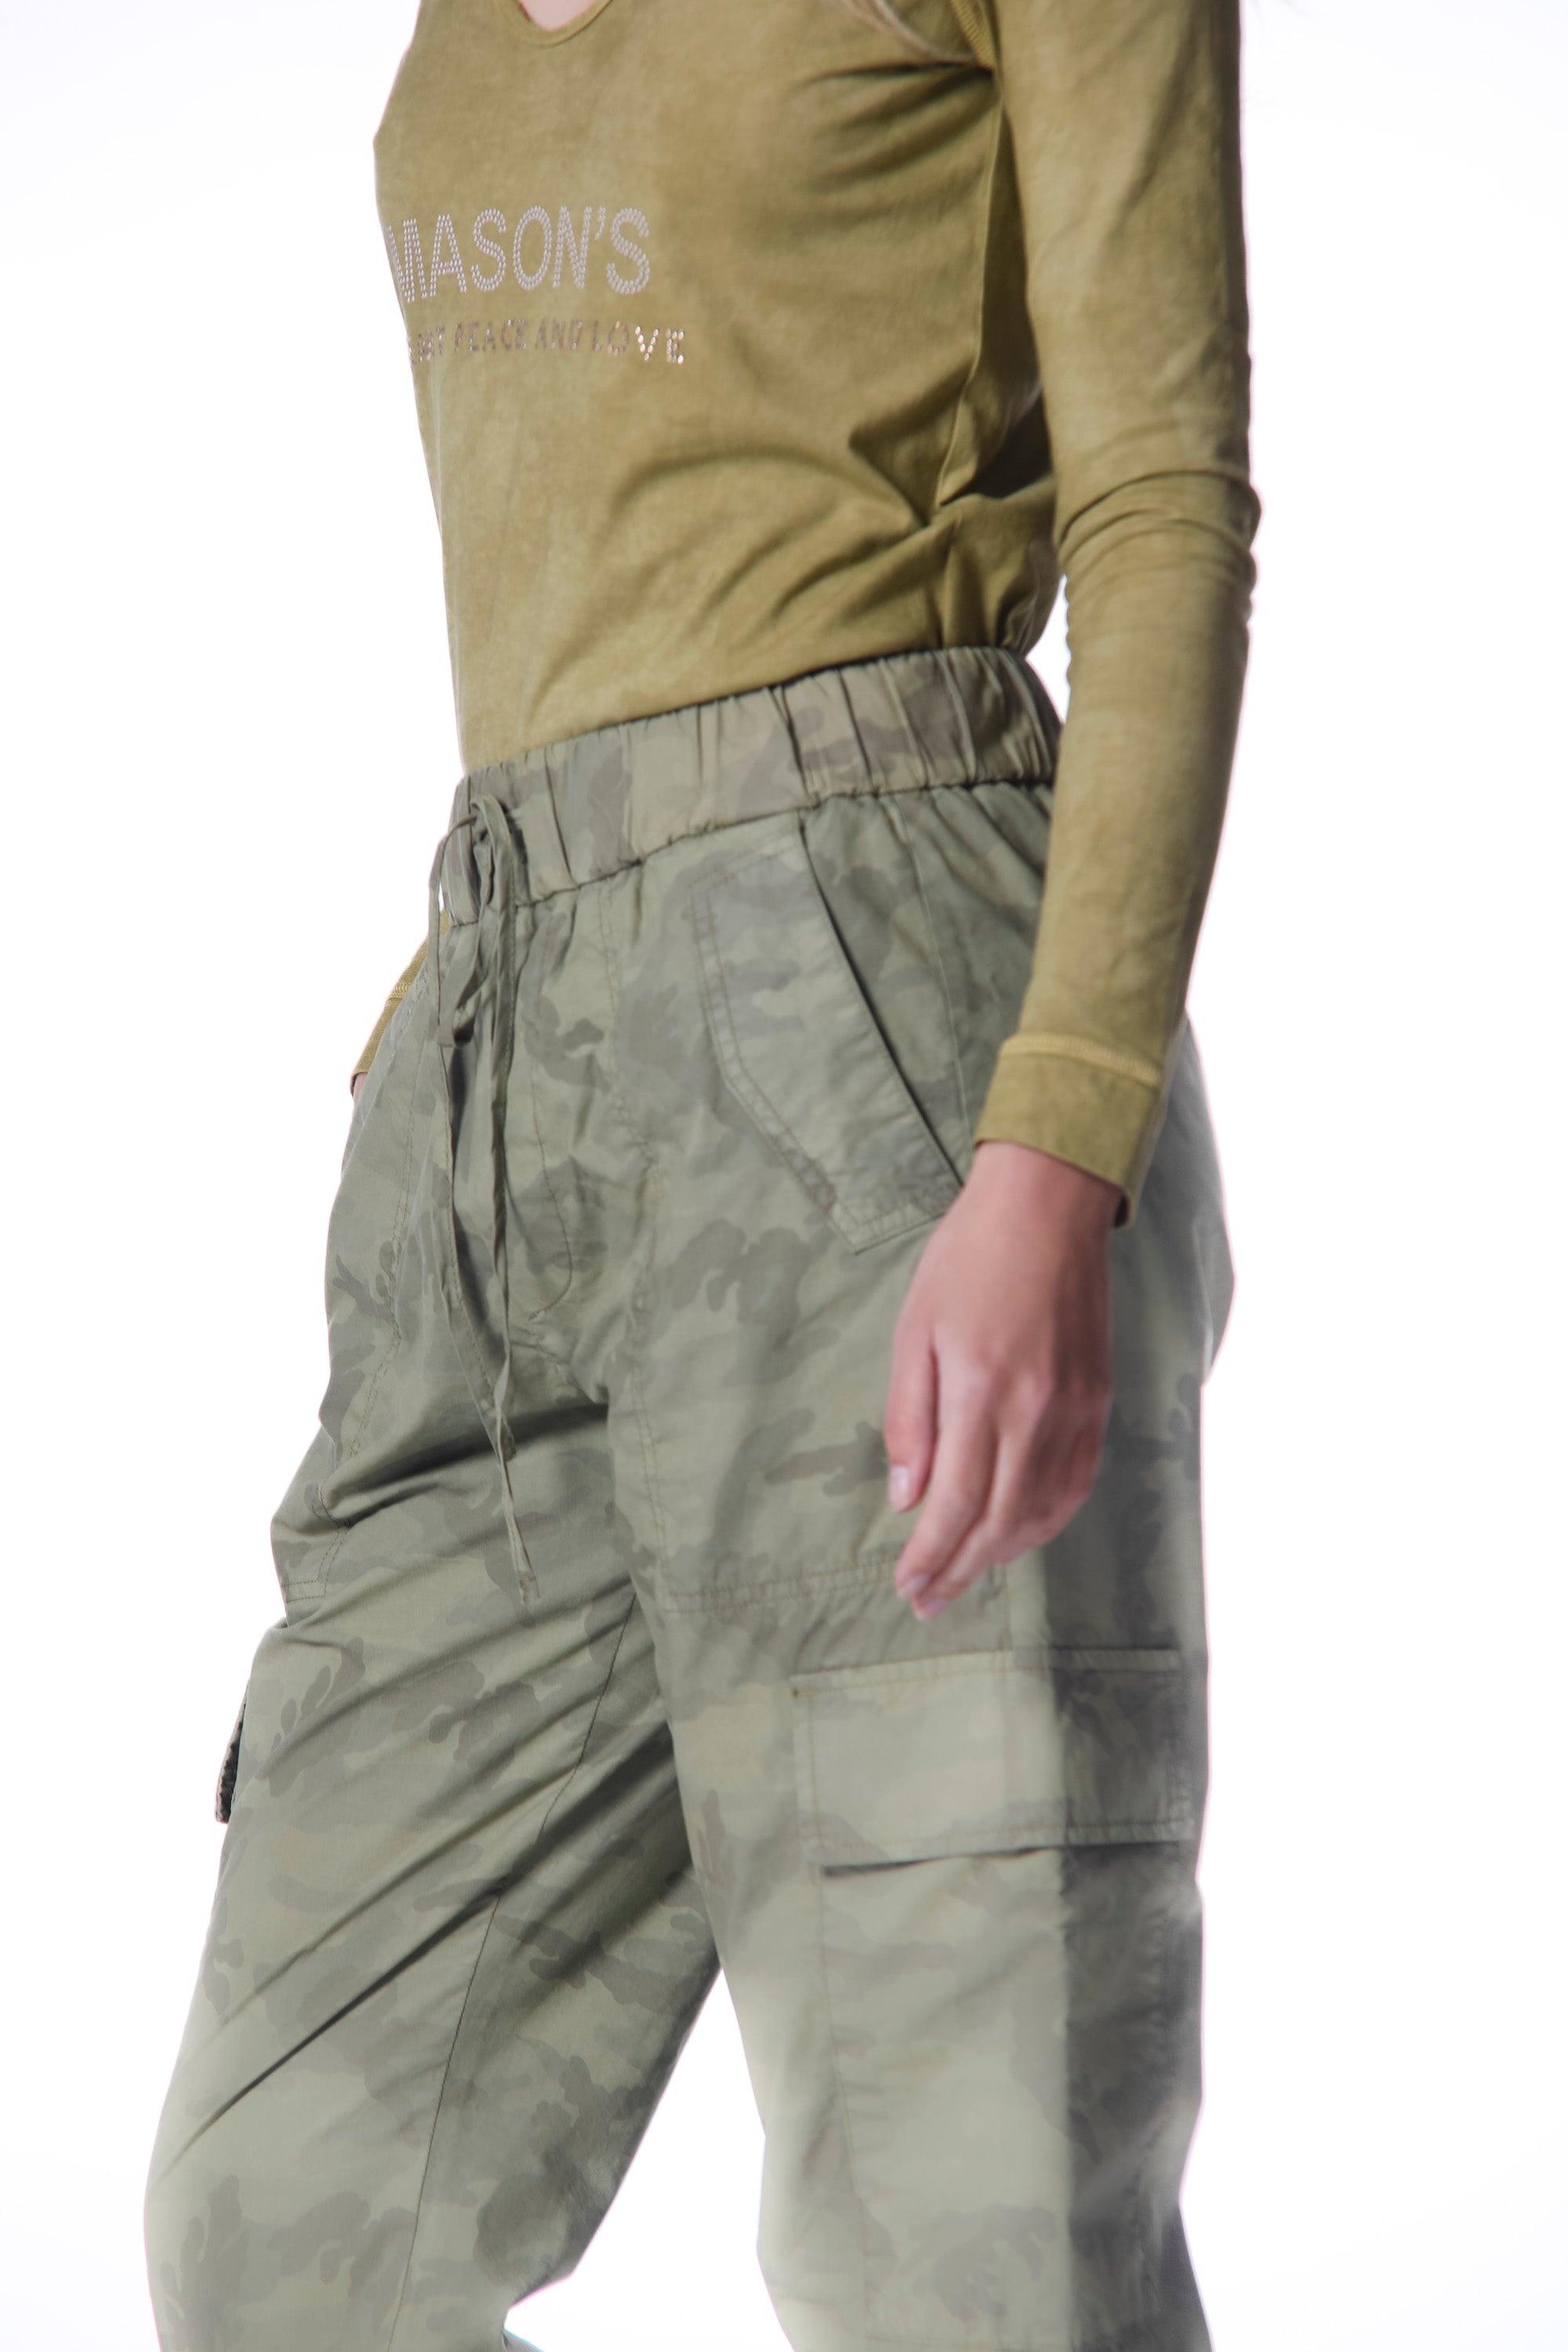 Cargo Jogger woman cargo pants in tencel with camouflage pattern relaxed